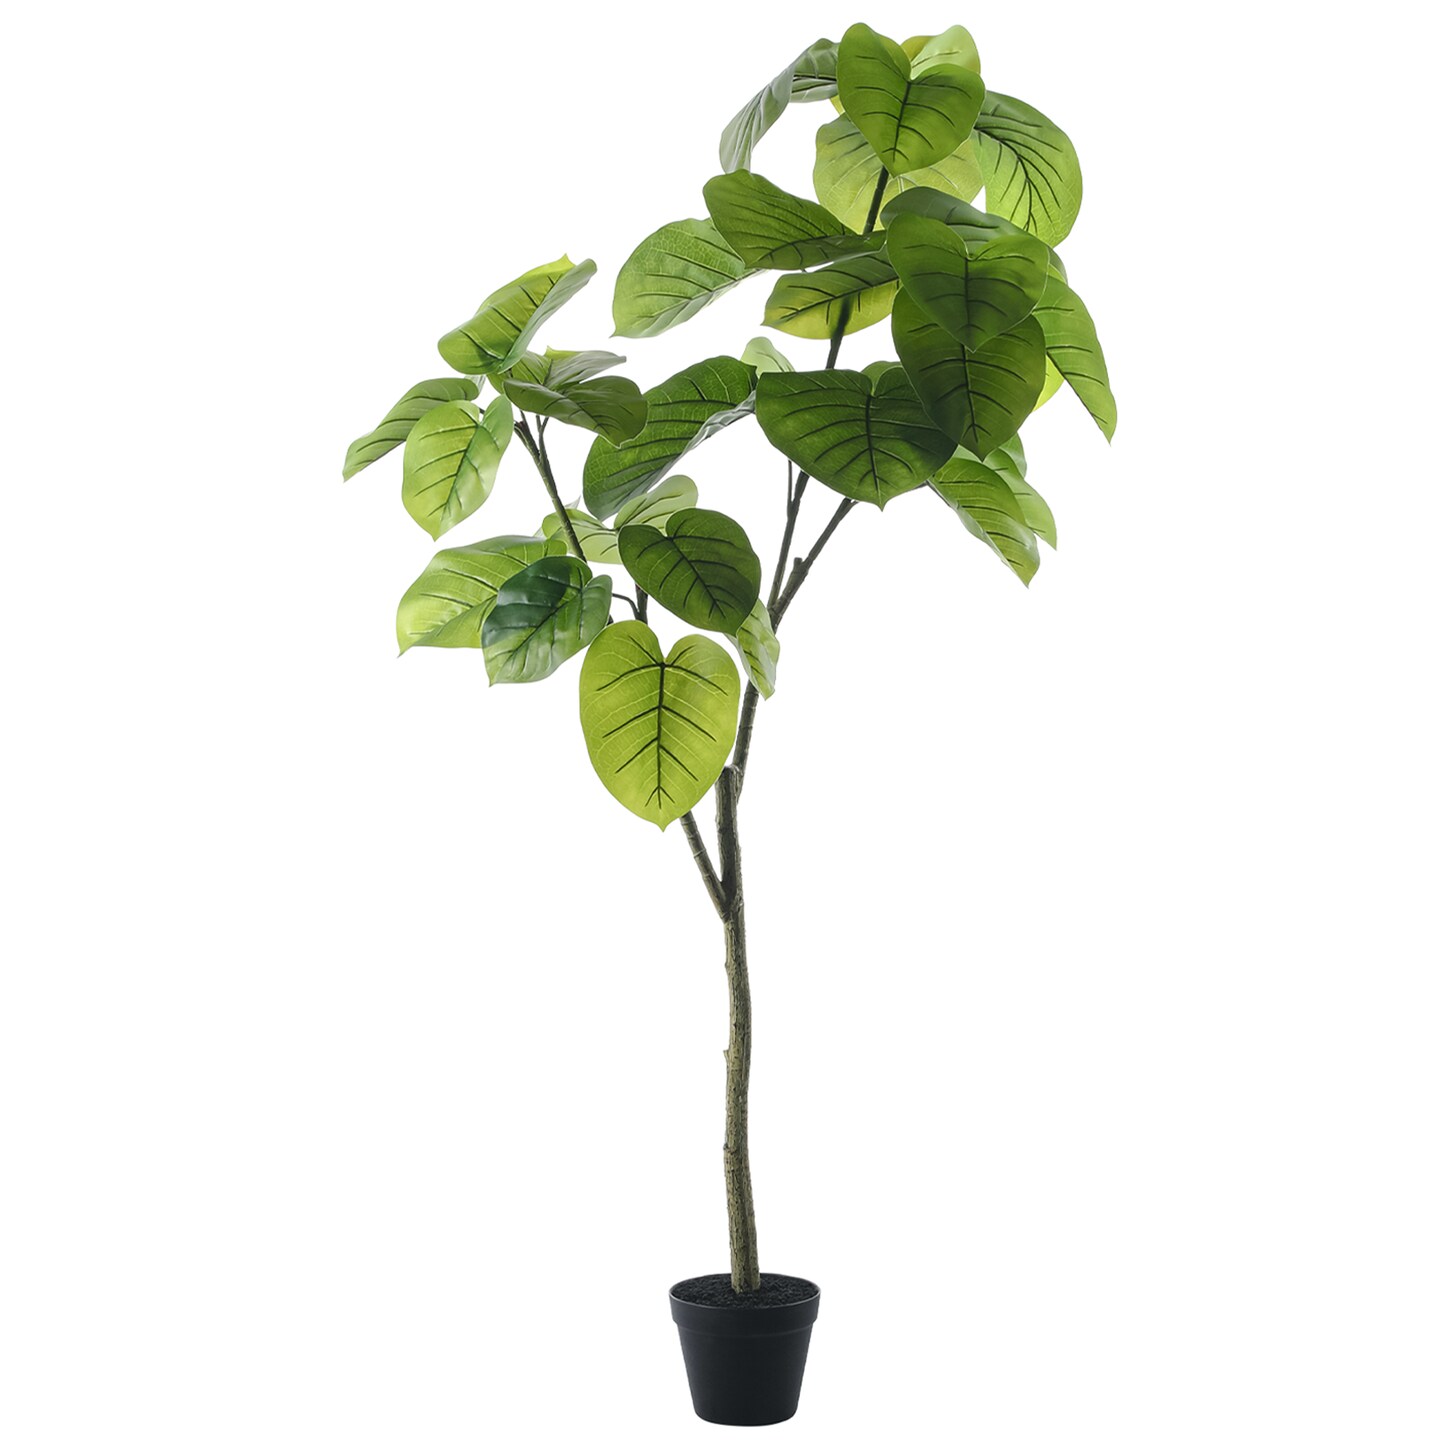 Artificial Trees for Home Decor Indoor - Fake Plants & Faux Plants Indoor - Fake  Plants Tall Ficus